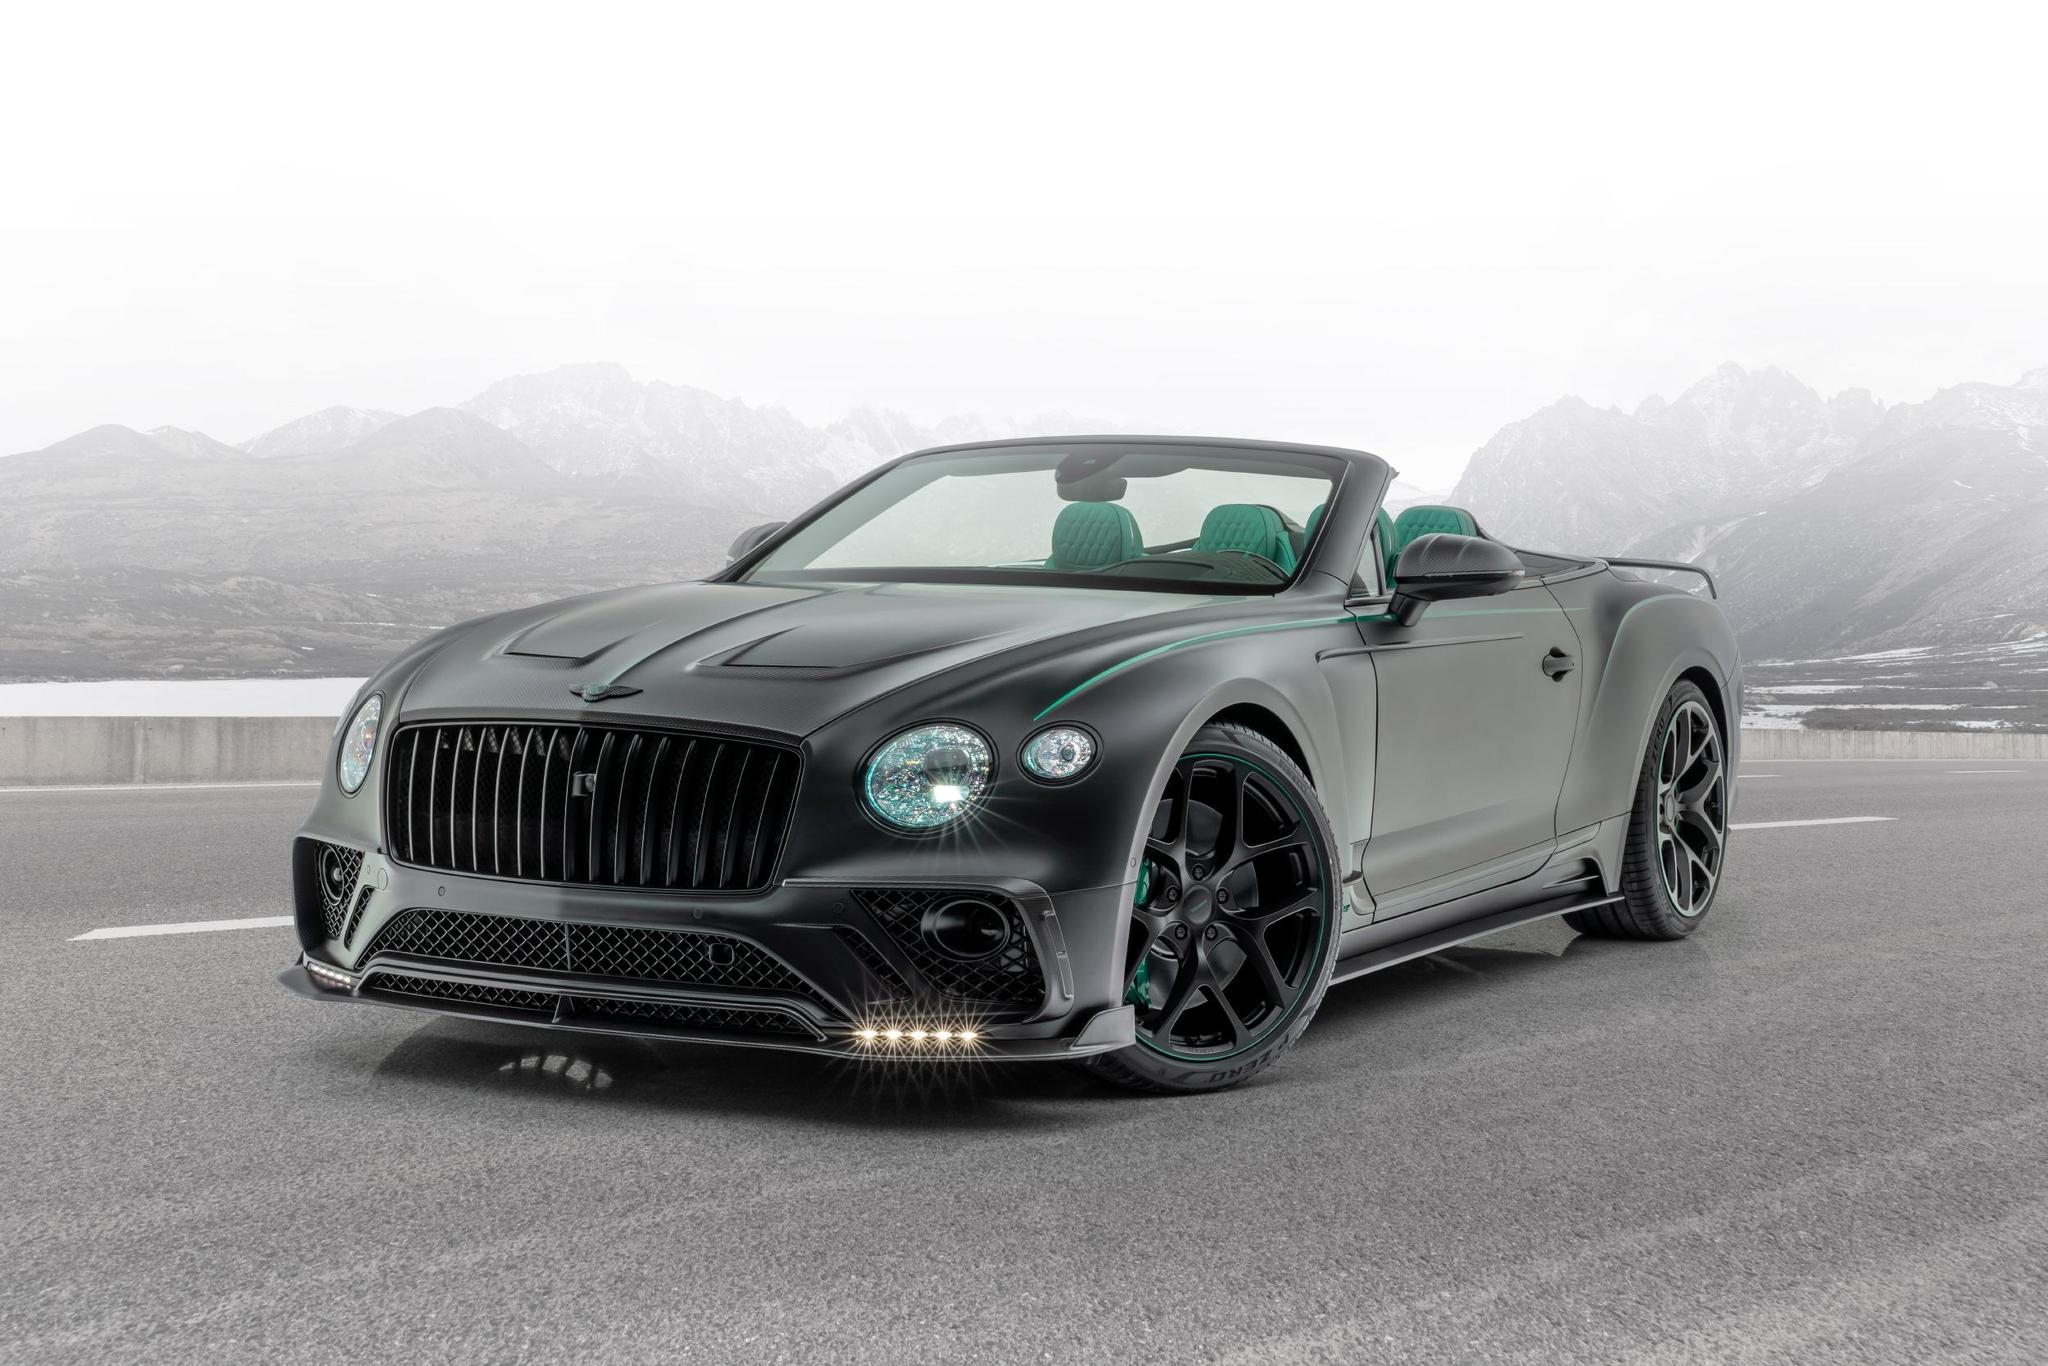 Mansory body kit for Bentley Continental GT new model